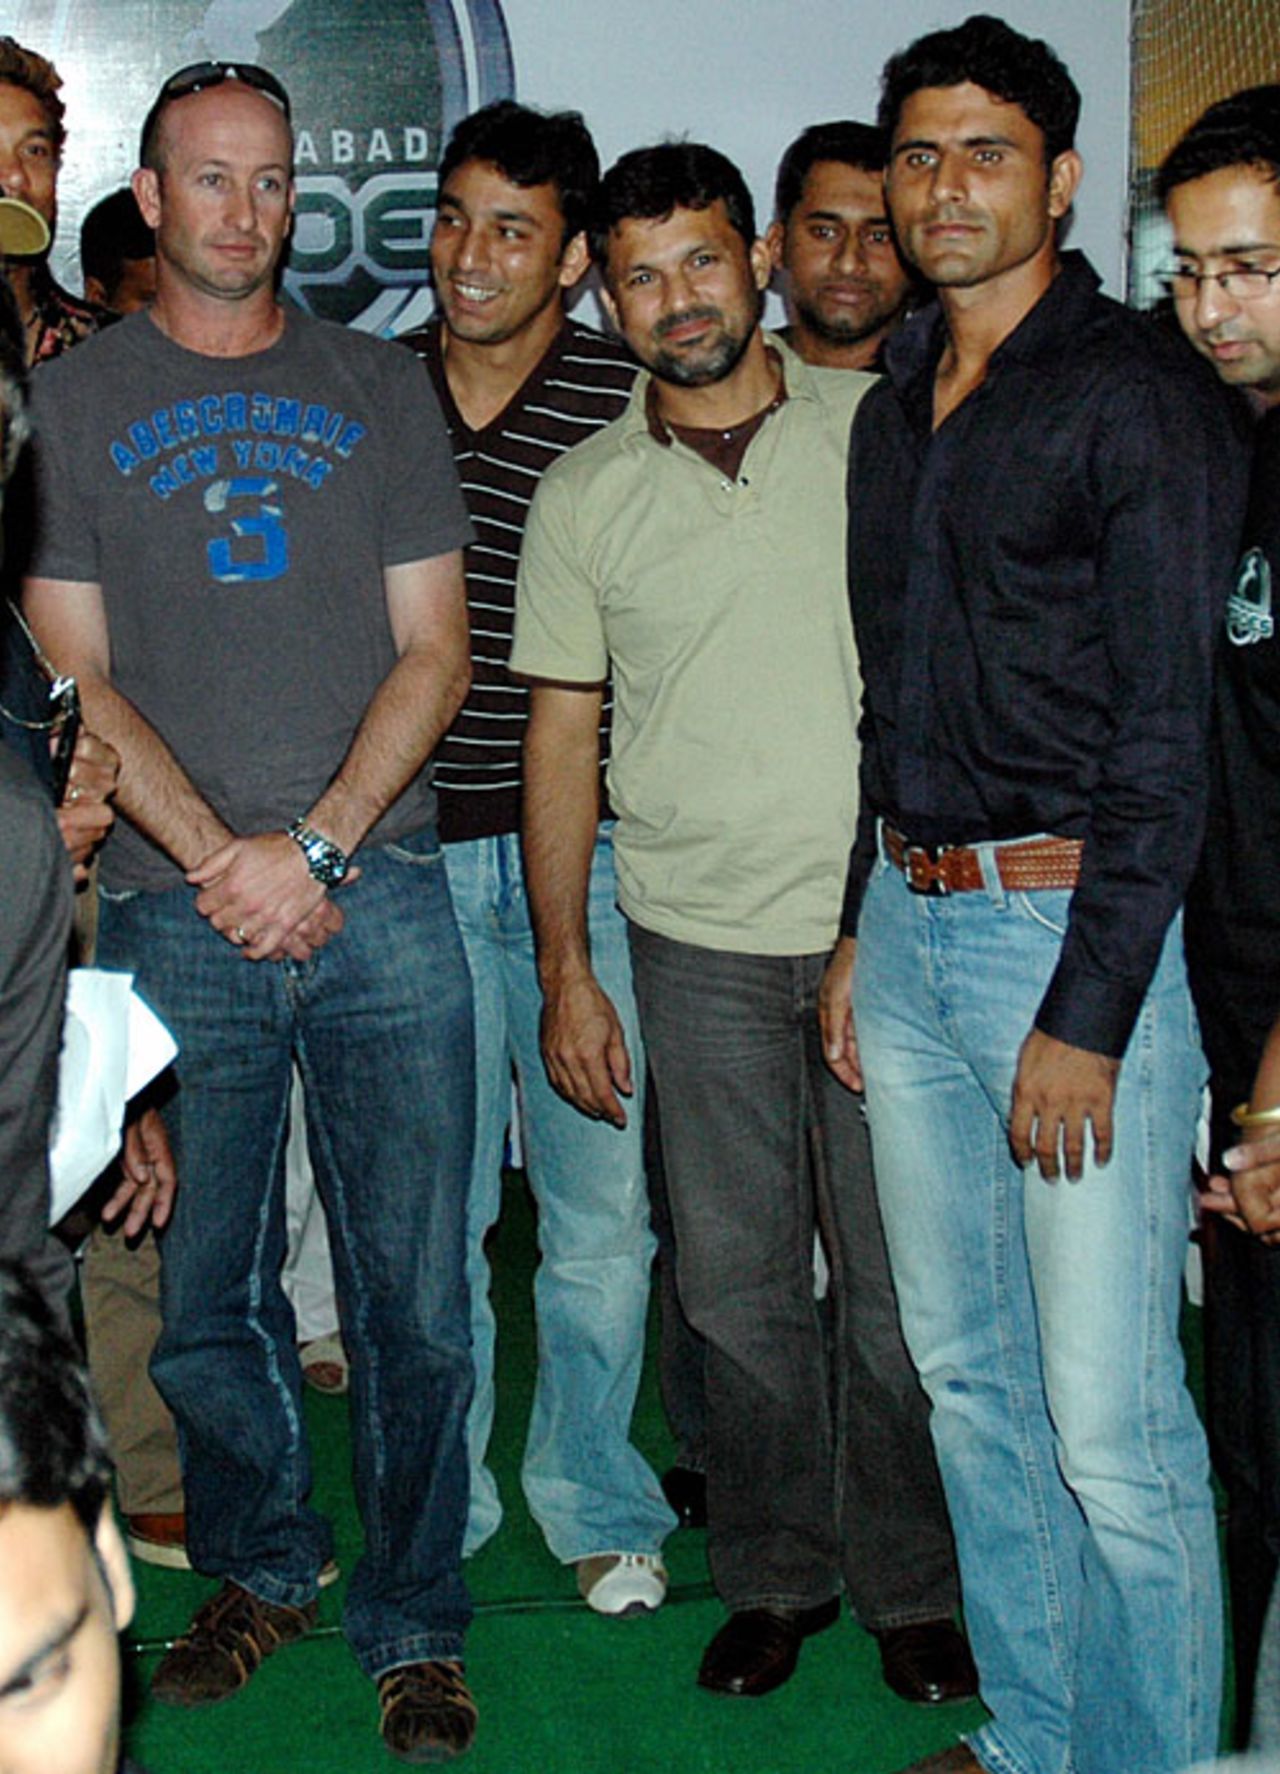 Indian Cricket League players Chris Harris, Azhar Mahmood, Moin Khan and Abdul Razzaq pose at an event in Hyderabad. The ICL players are in the city for a ten-day camp ahead of the tournament commencing in Chandigarh from 30 November, Hyderabad, November 18, 2007